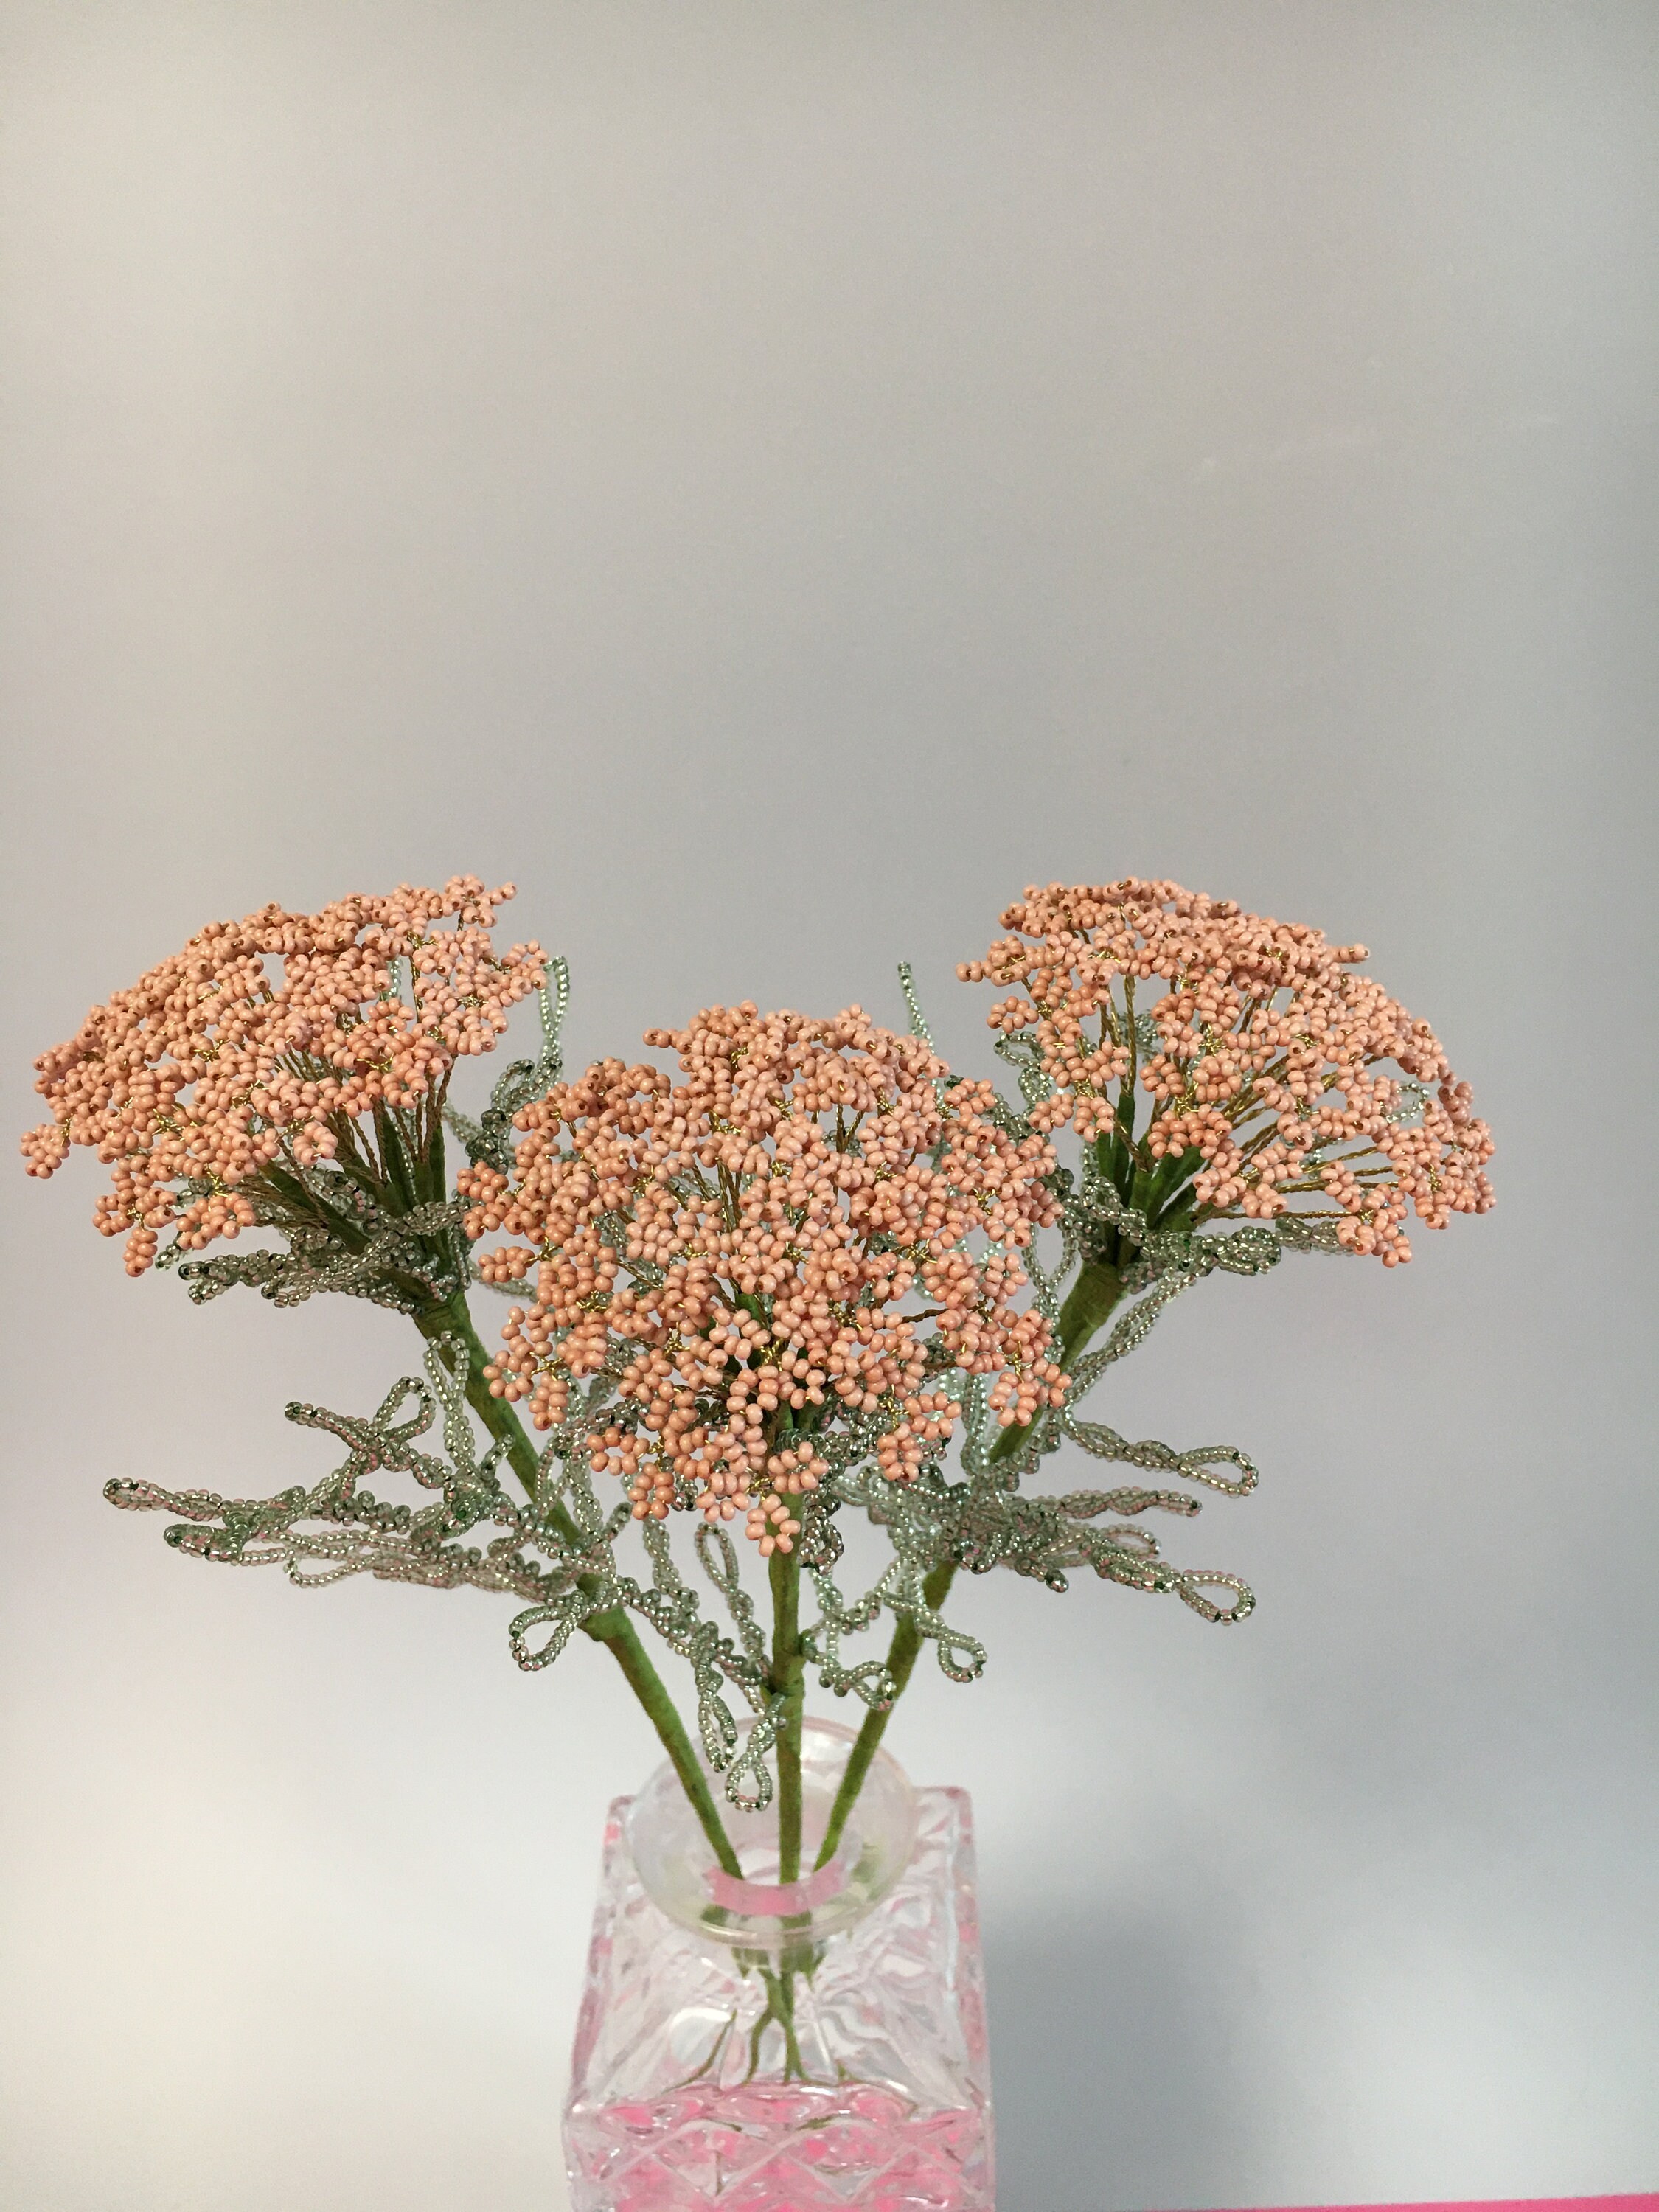 Dusty Rose Fake Wild Flowers French Beaded Flowers Artificial Wild Flowers  